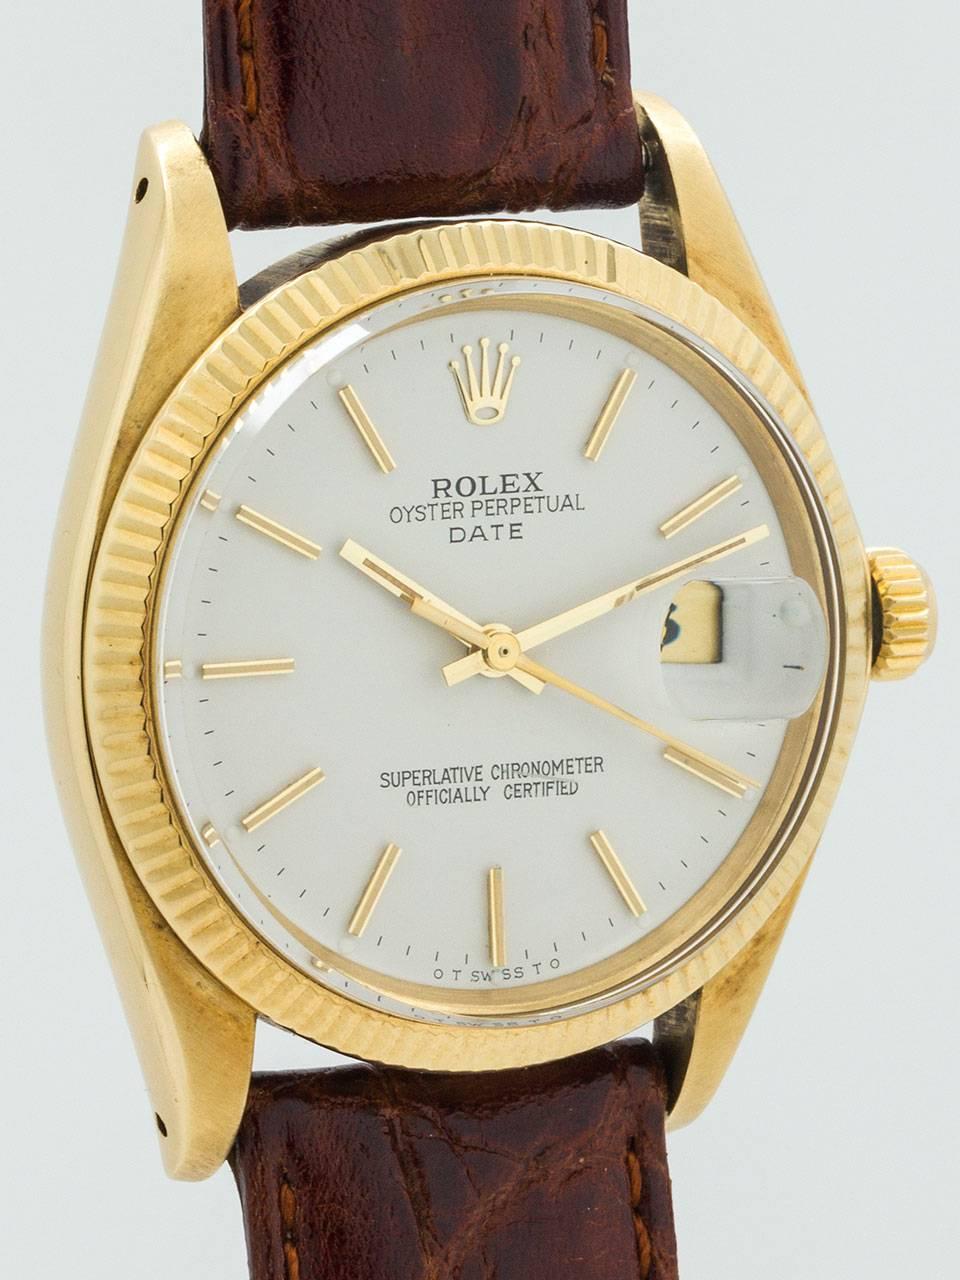 Vintage Rolex Oyster Perpetual Date ref 1503 serial number 3.5 million circa 1973. Featuring 34mm diameter 14K yellow gold case with fine milled bezel and acrylic crystal. Very pleasing restored antique white dial with applied gold indexes and gilt